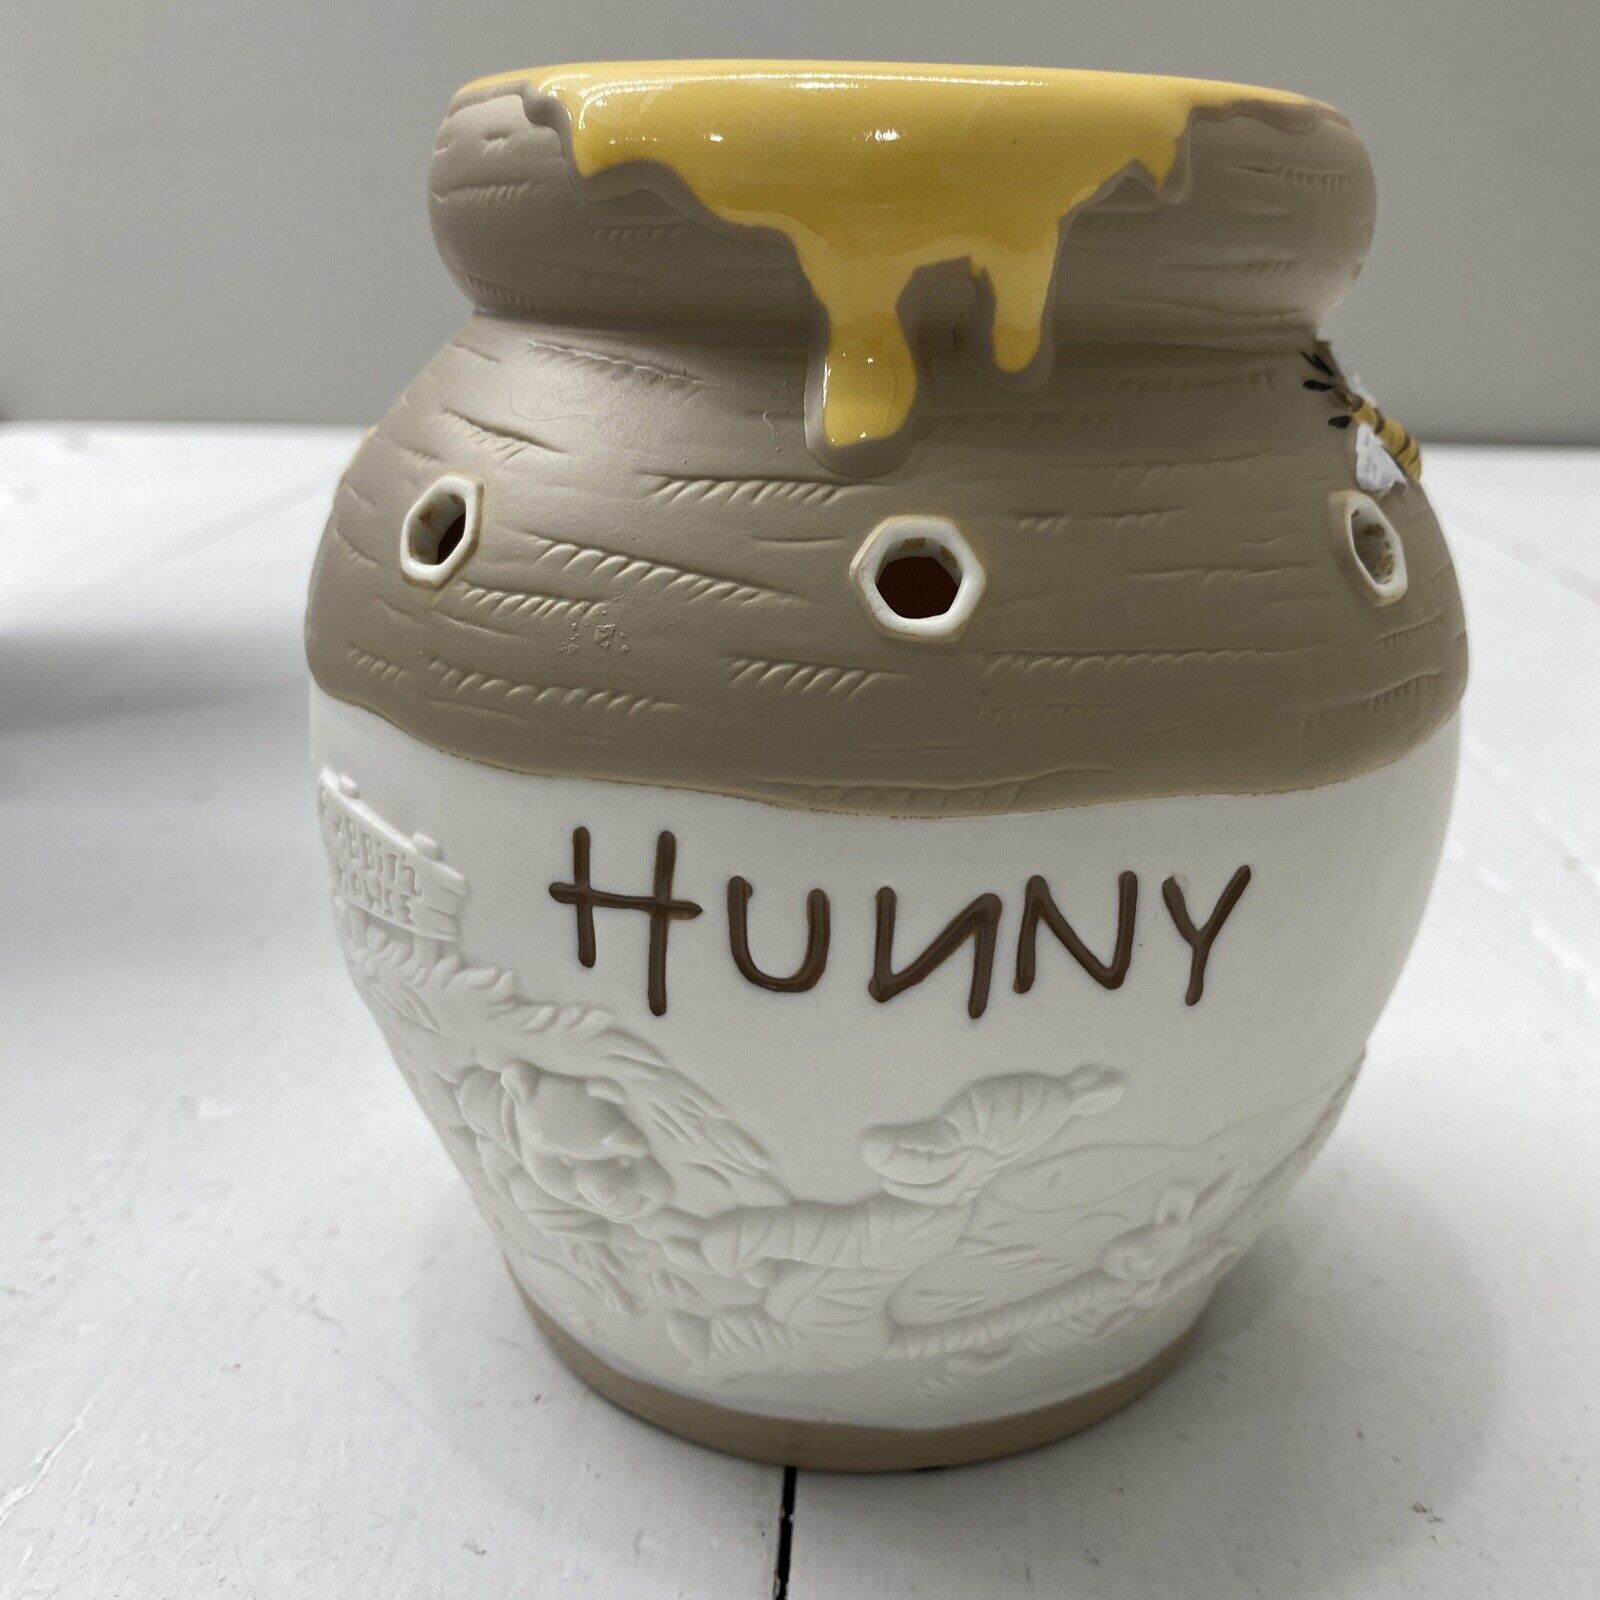 Enter Our Hunny Pot Scentsy Giveaway Featuring 'Winnie the Pooh